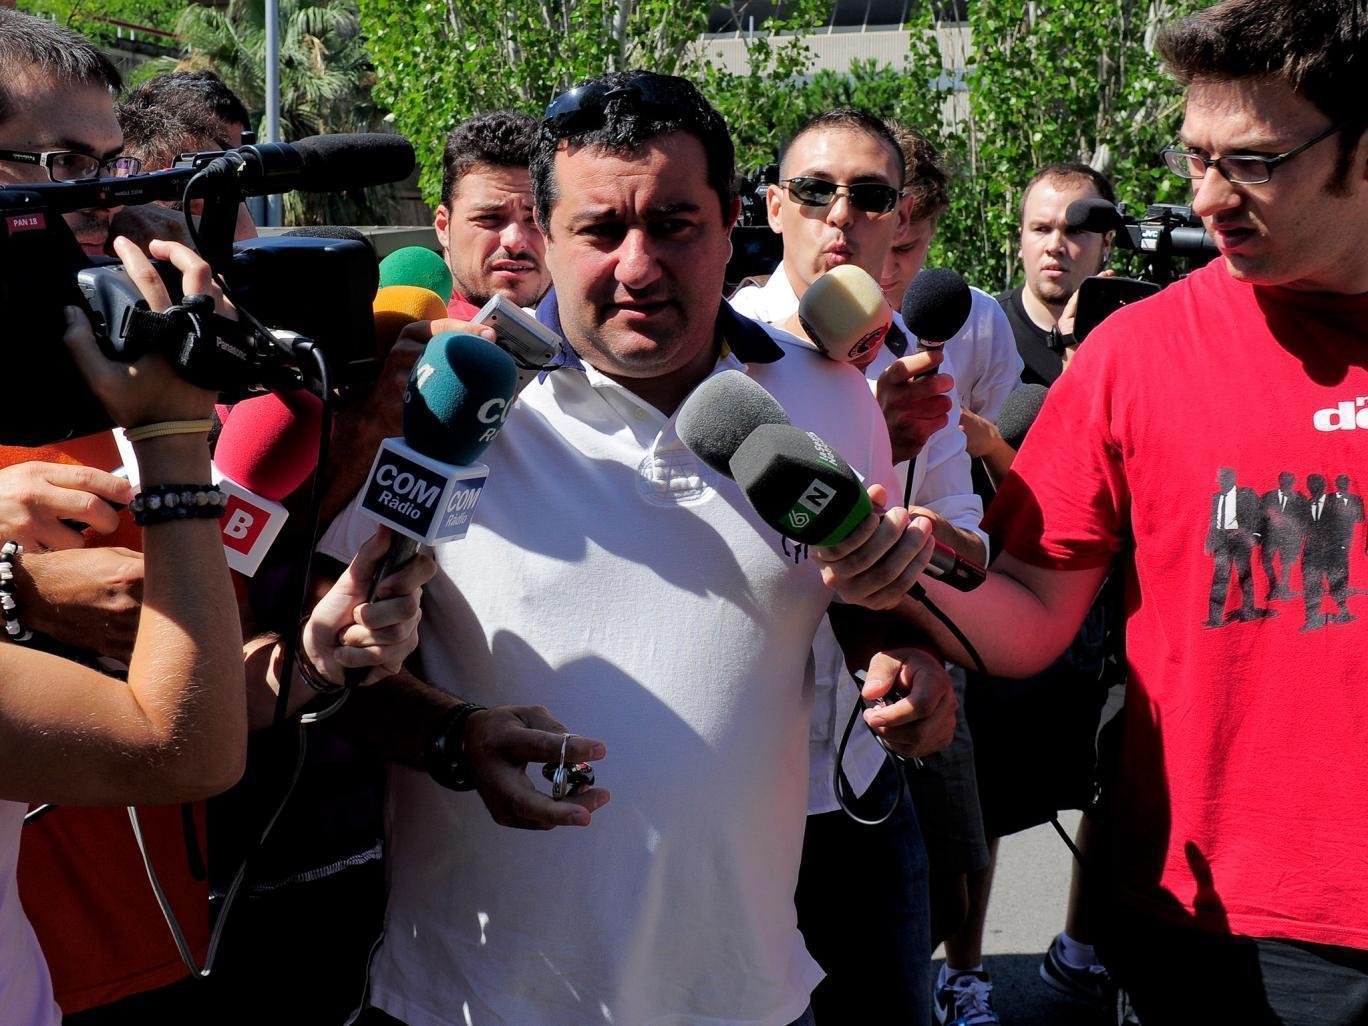 Mino Raiola claims that no deal has been agreed (Getty)